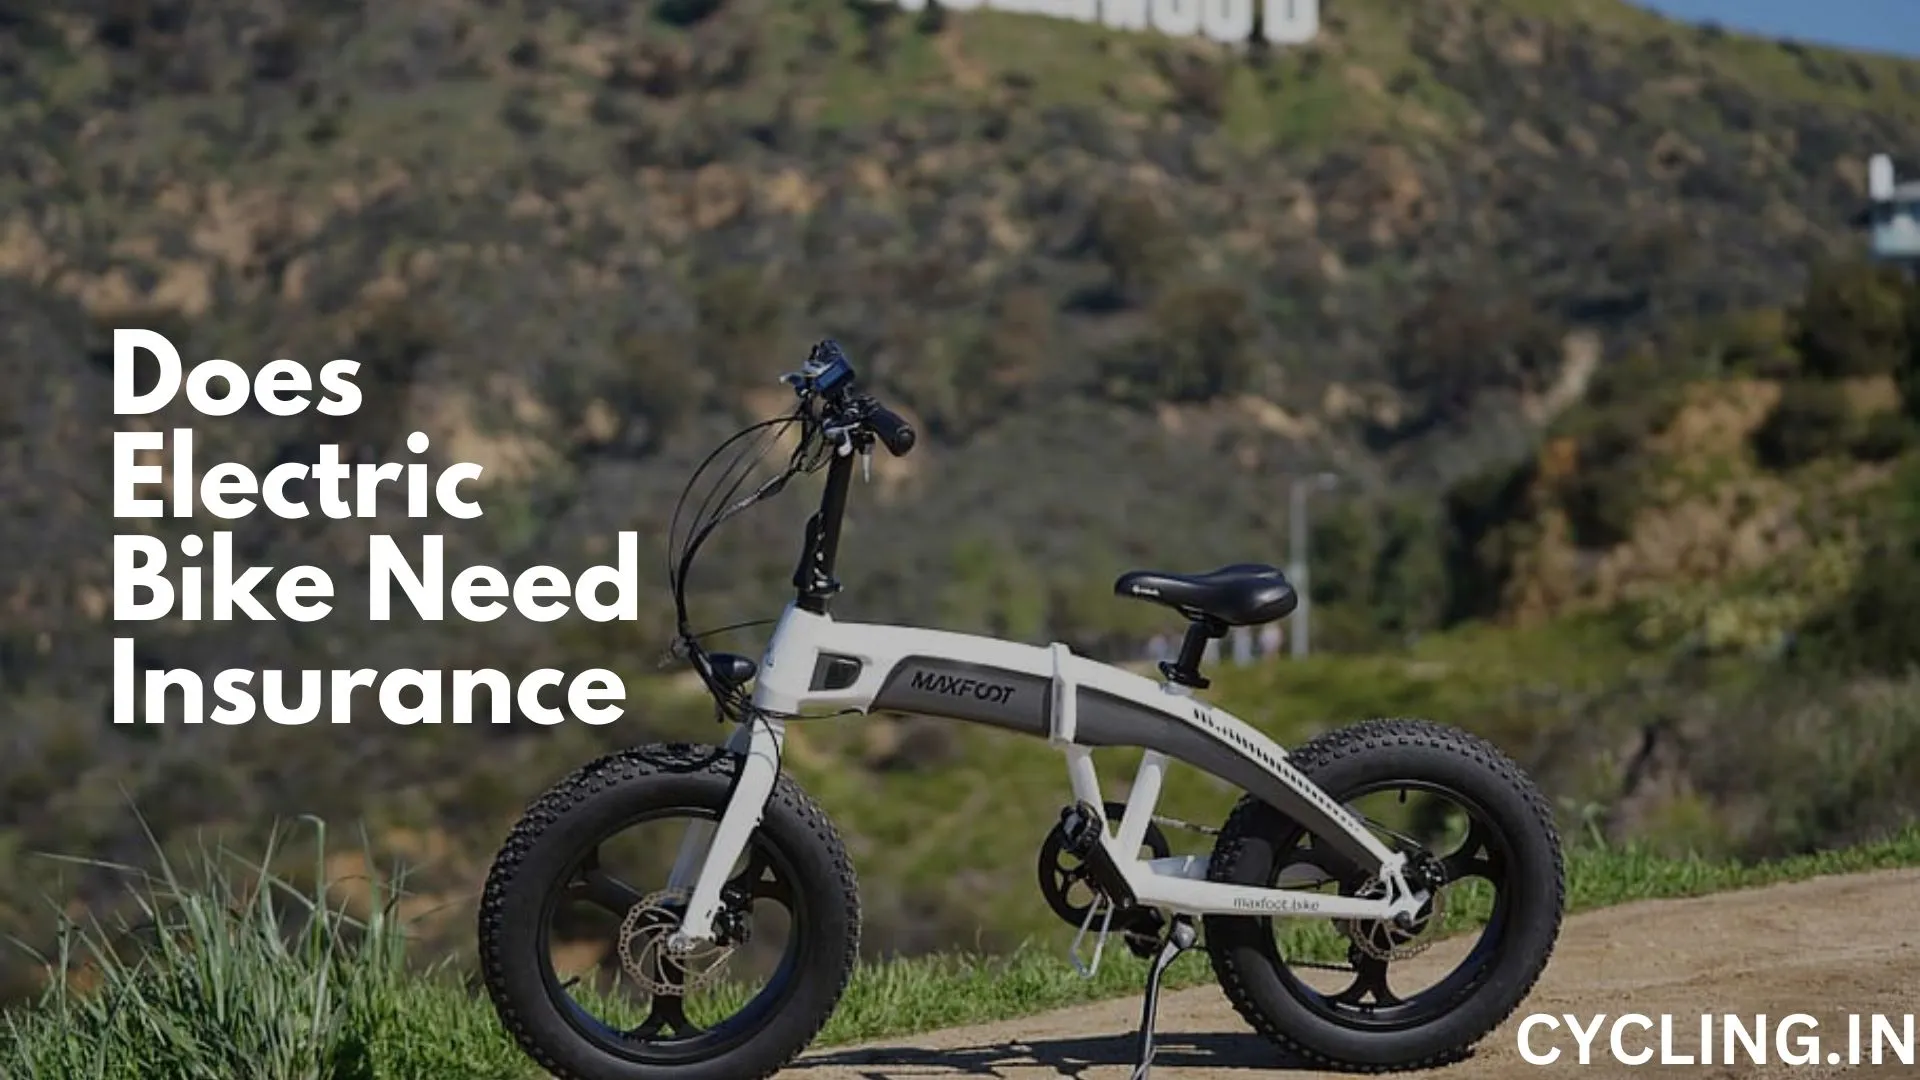 Does Electric Bike Need Insurance in India - A E-bike standing in the Hollywood valley.